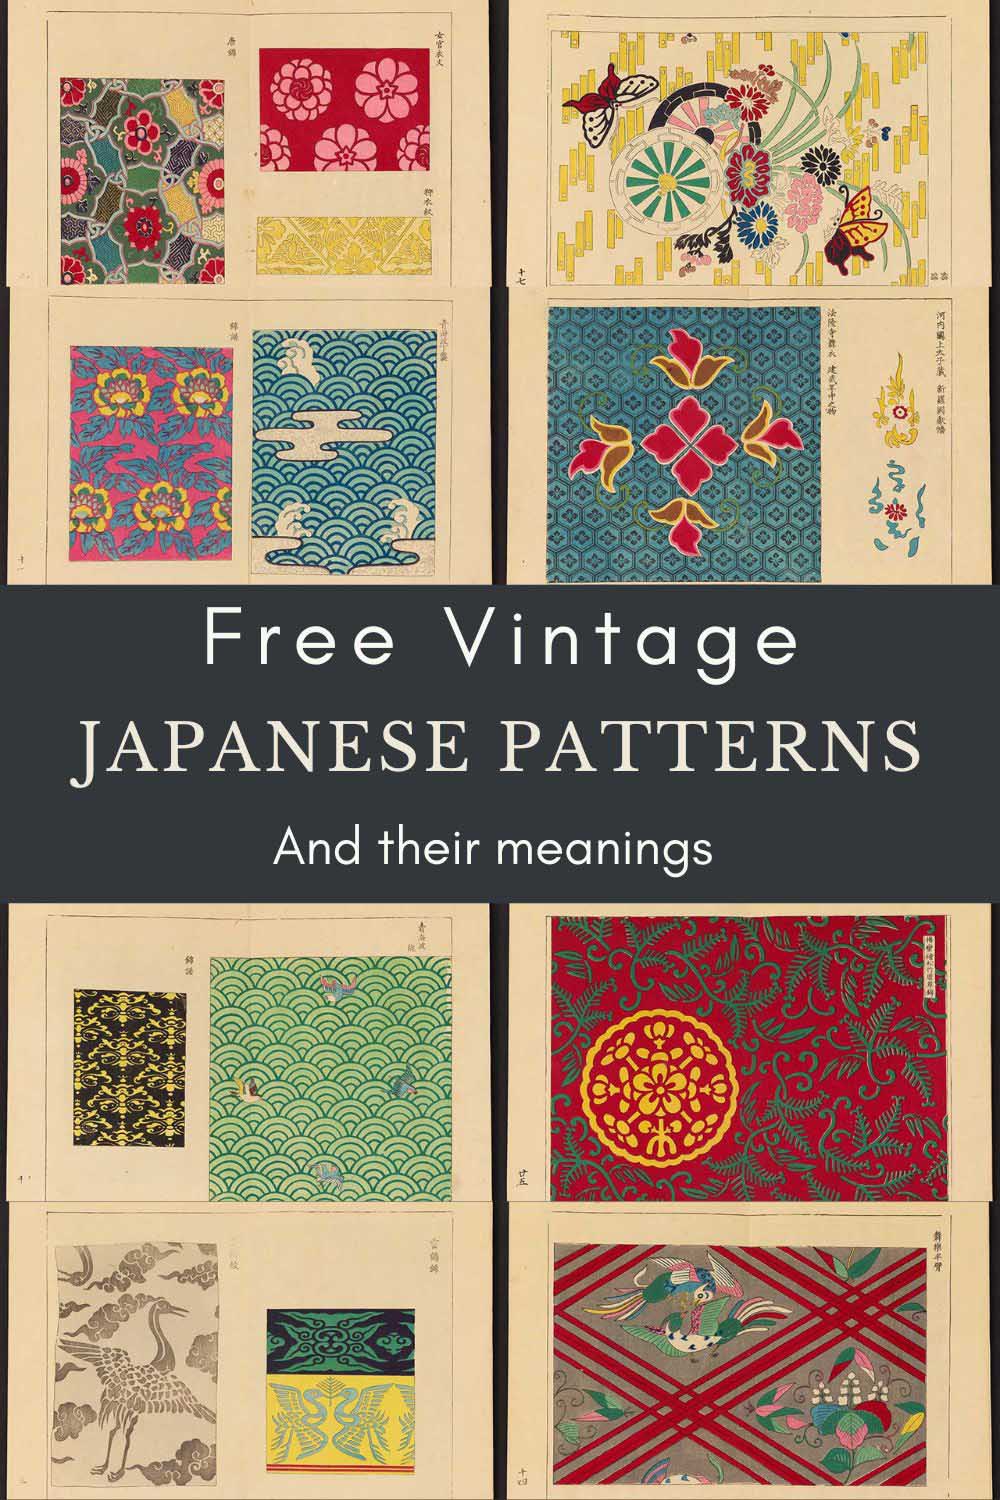 Tradtional Japanese Patterns examples pin